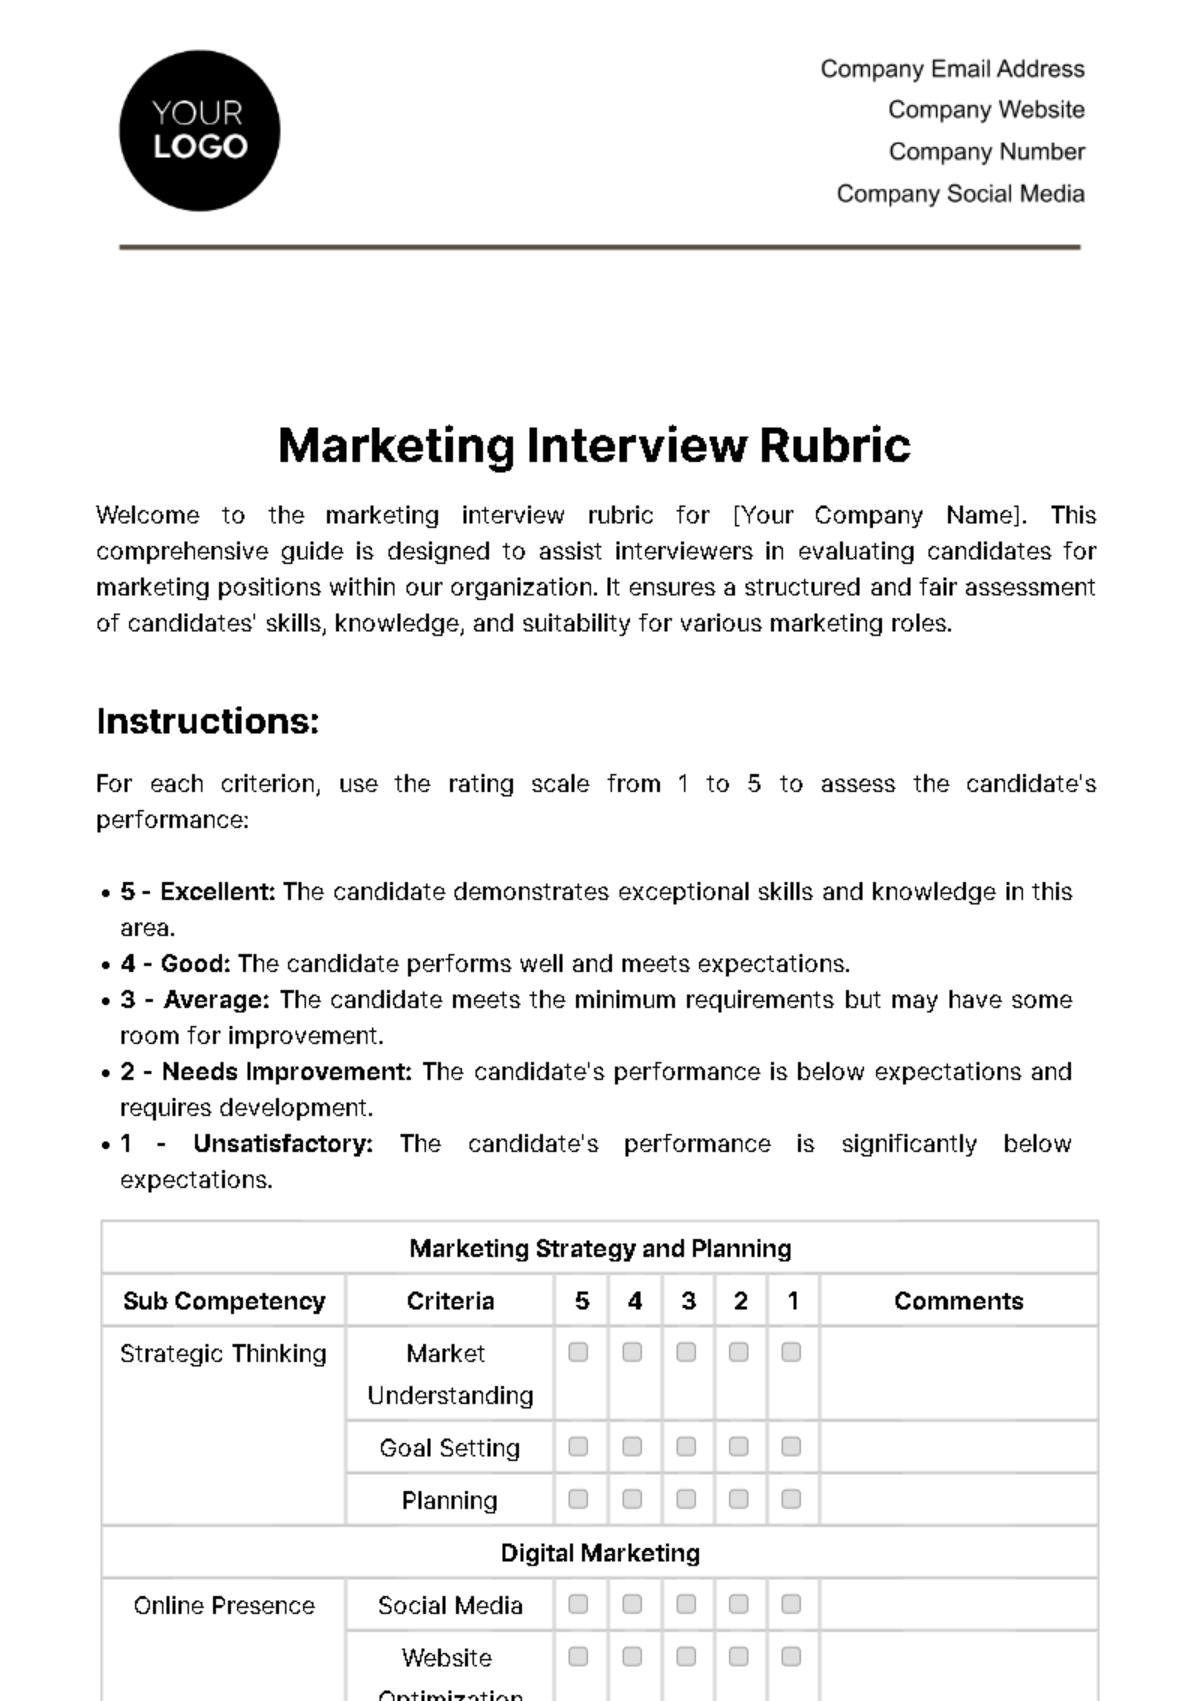 Marketing Interview Rubric Template